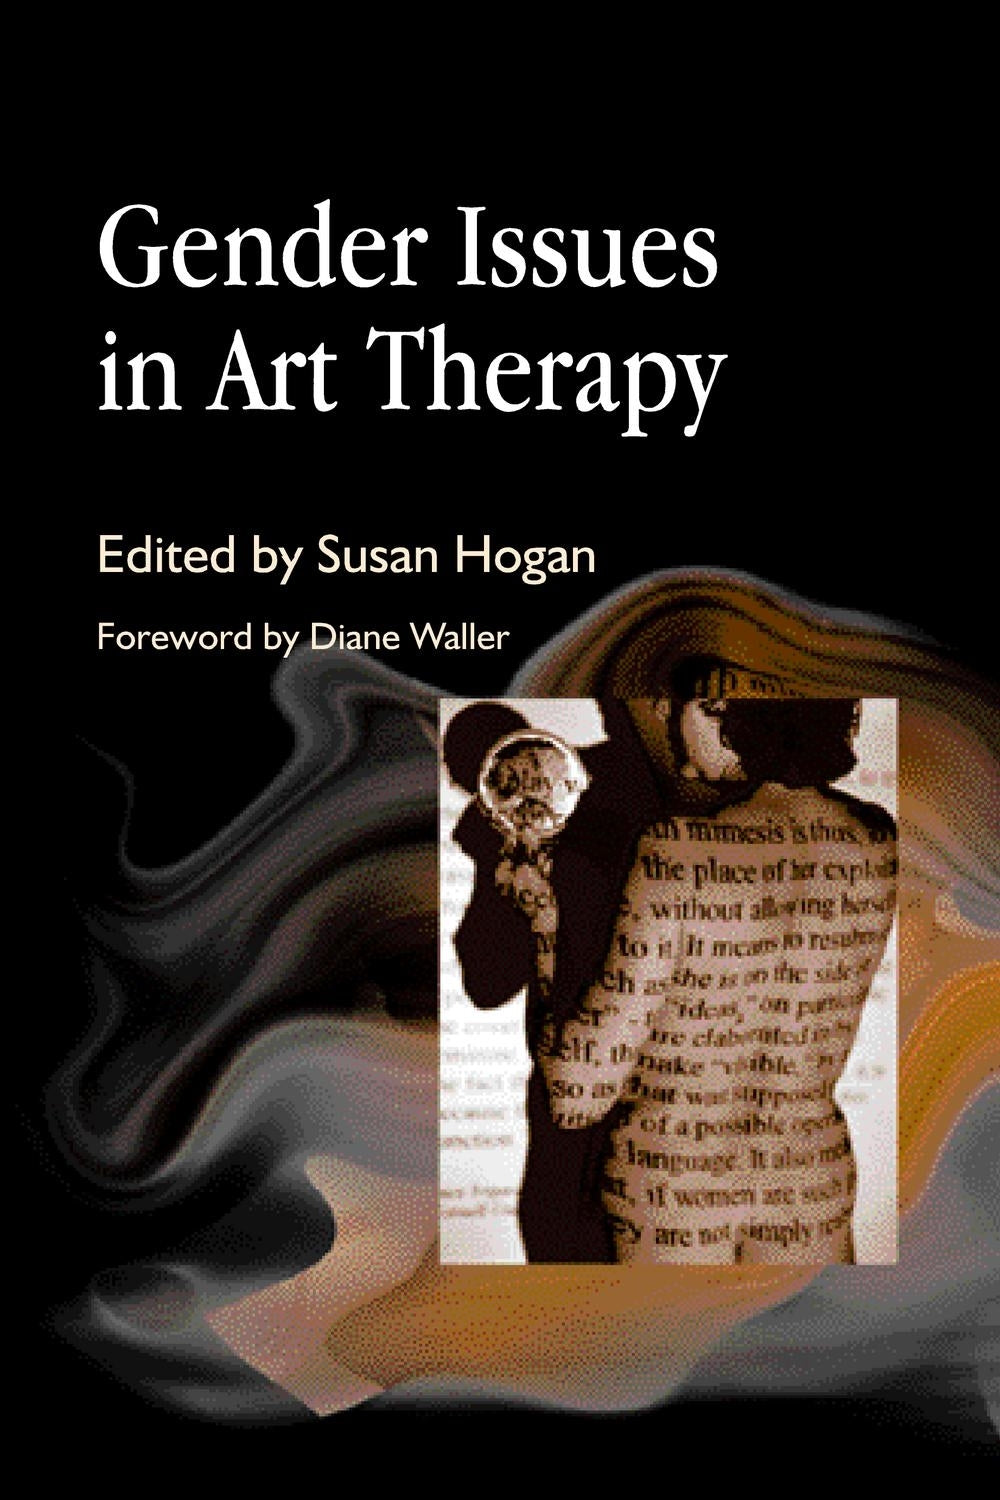 Gender Issues in Art Therapy by Susan Hogan